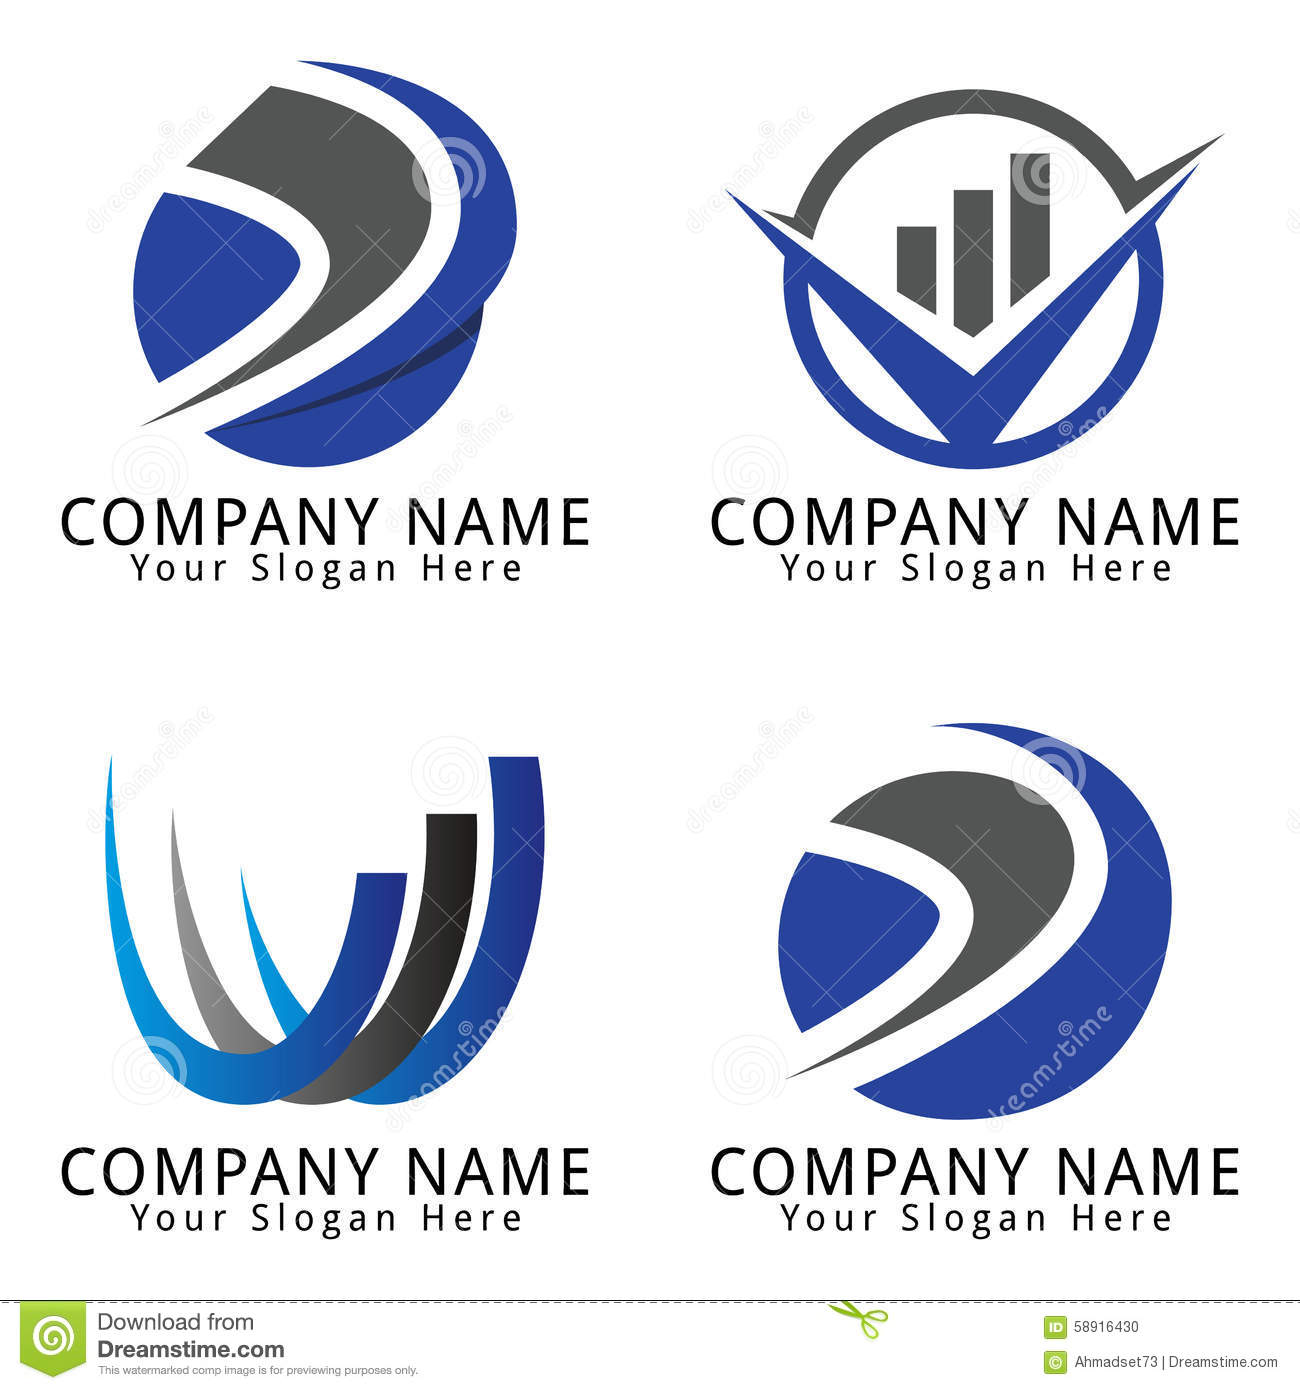 Marketing Consulting Firm Logos